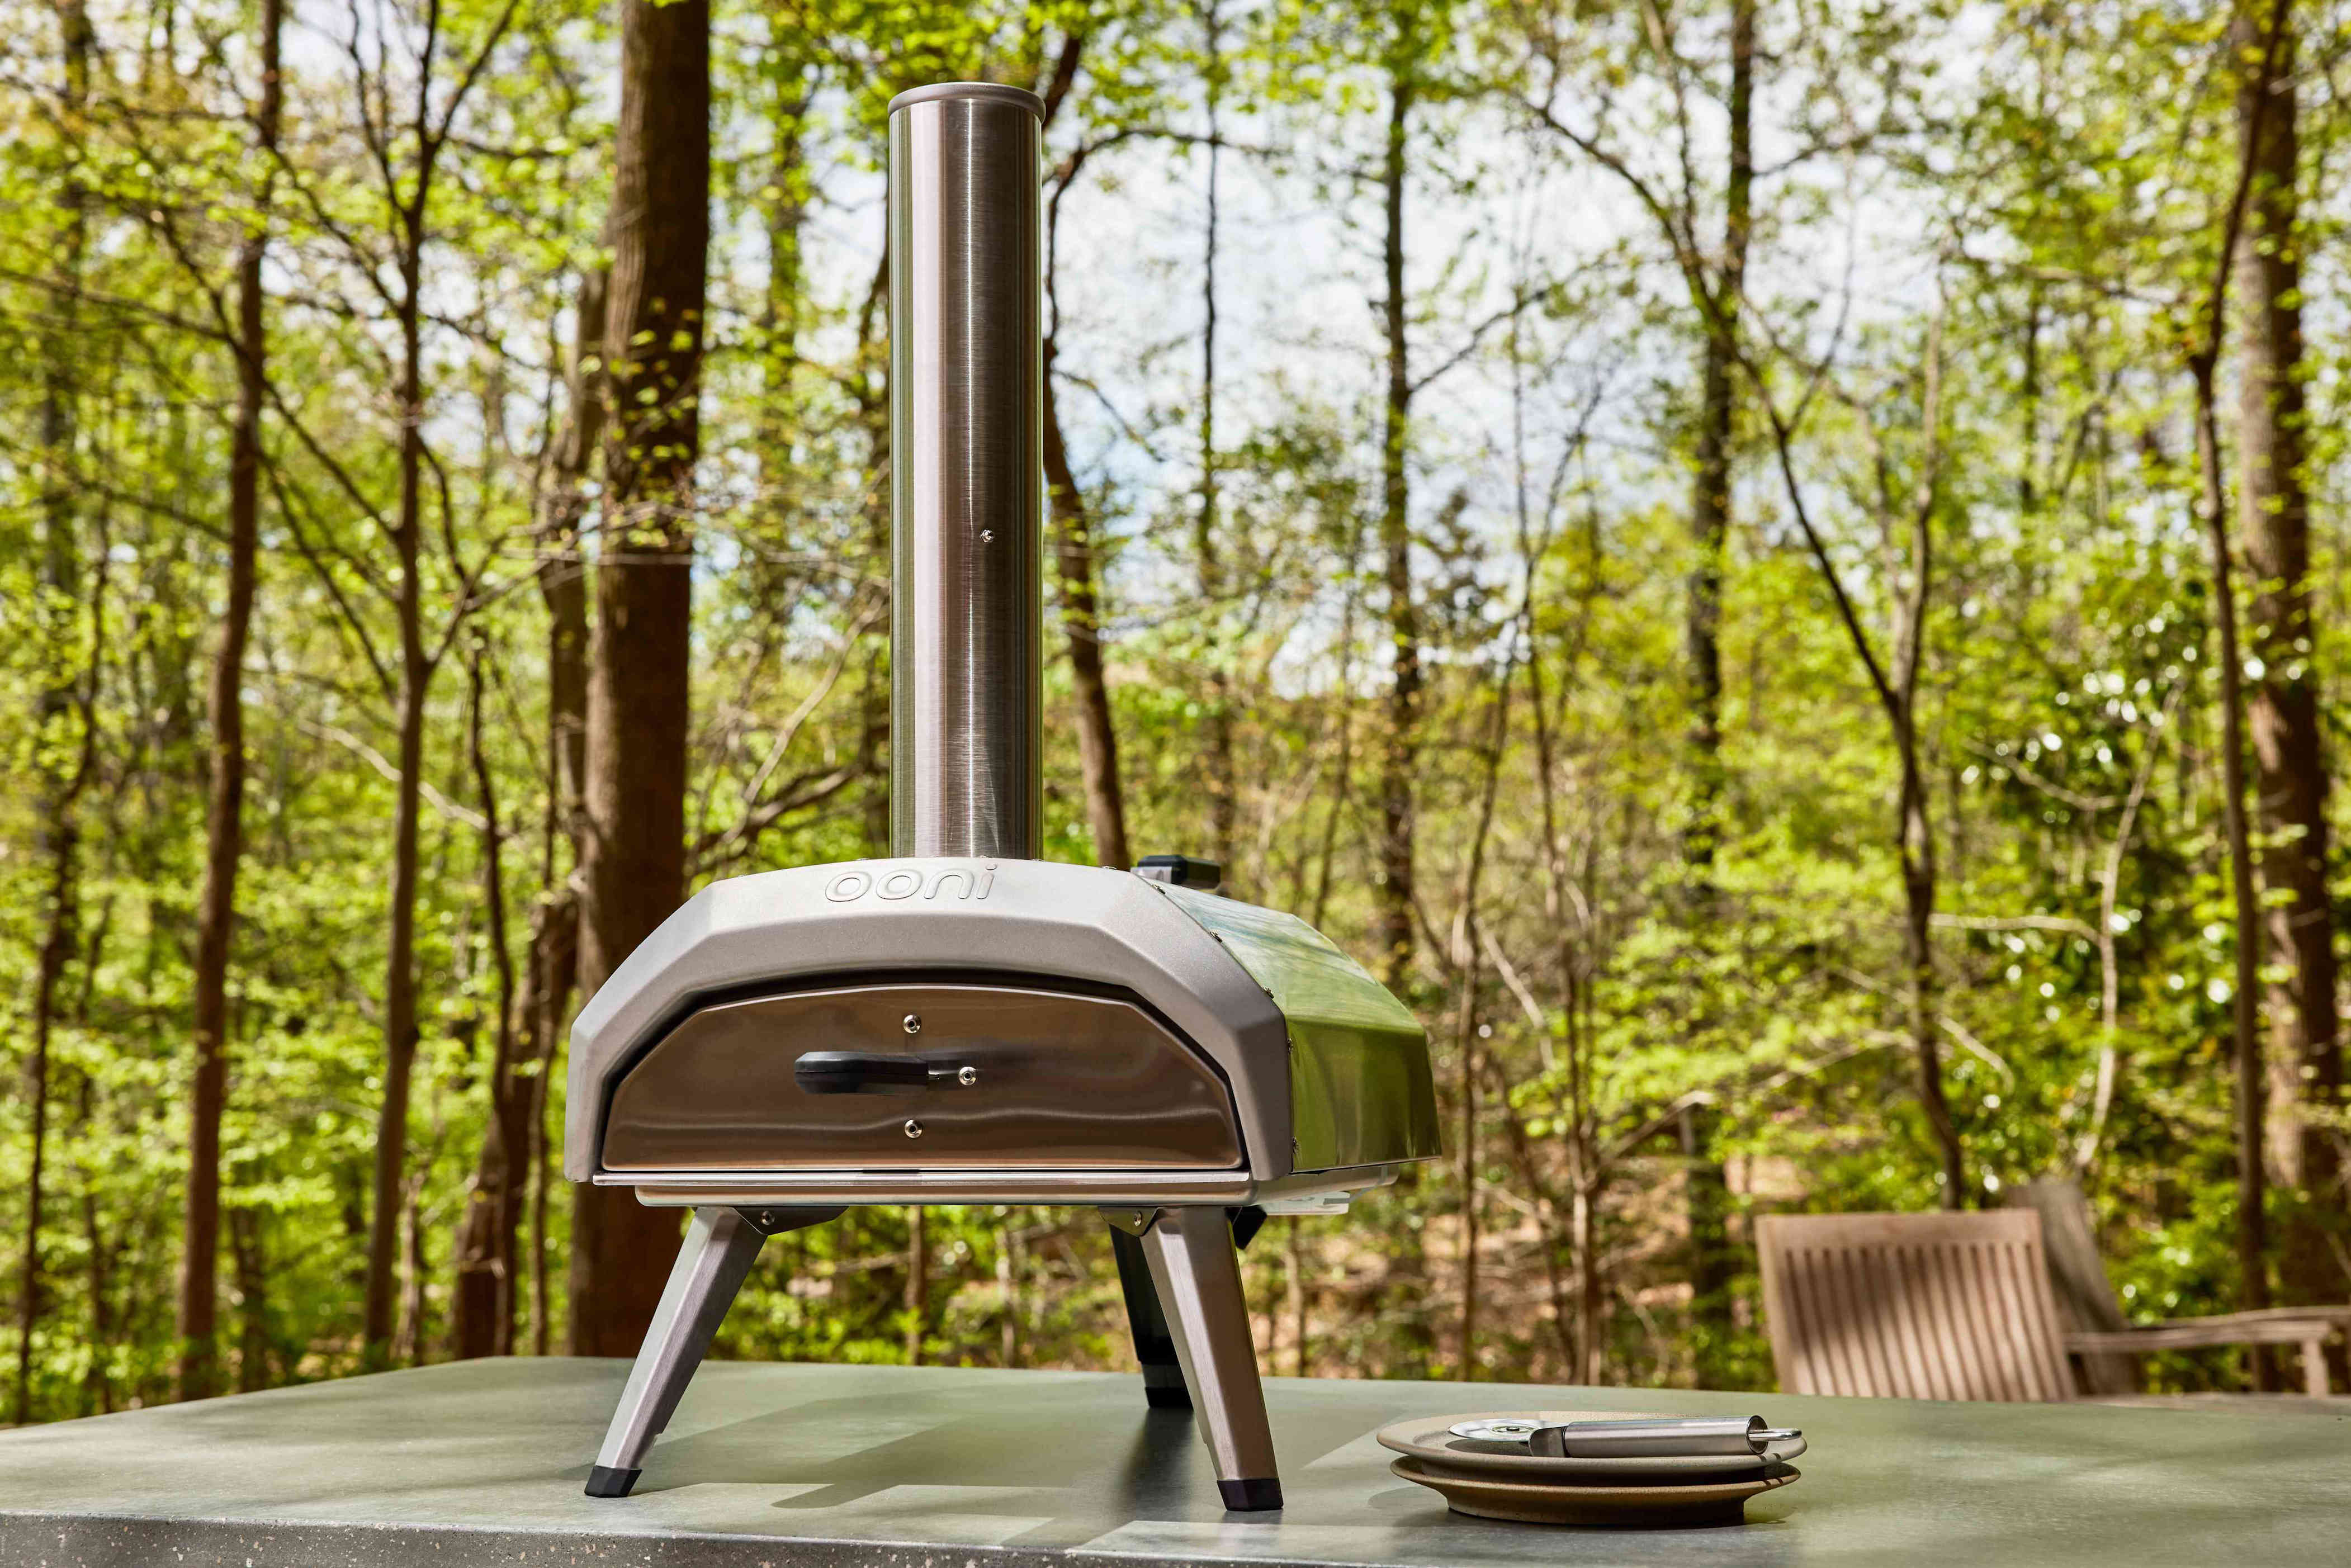 amazon, amazon launched a new section dedicated to outdoor cooking — shop 7 top picks from $3